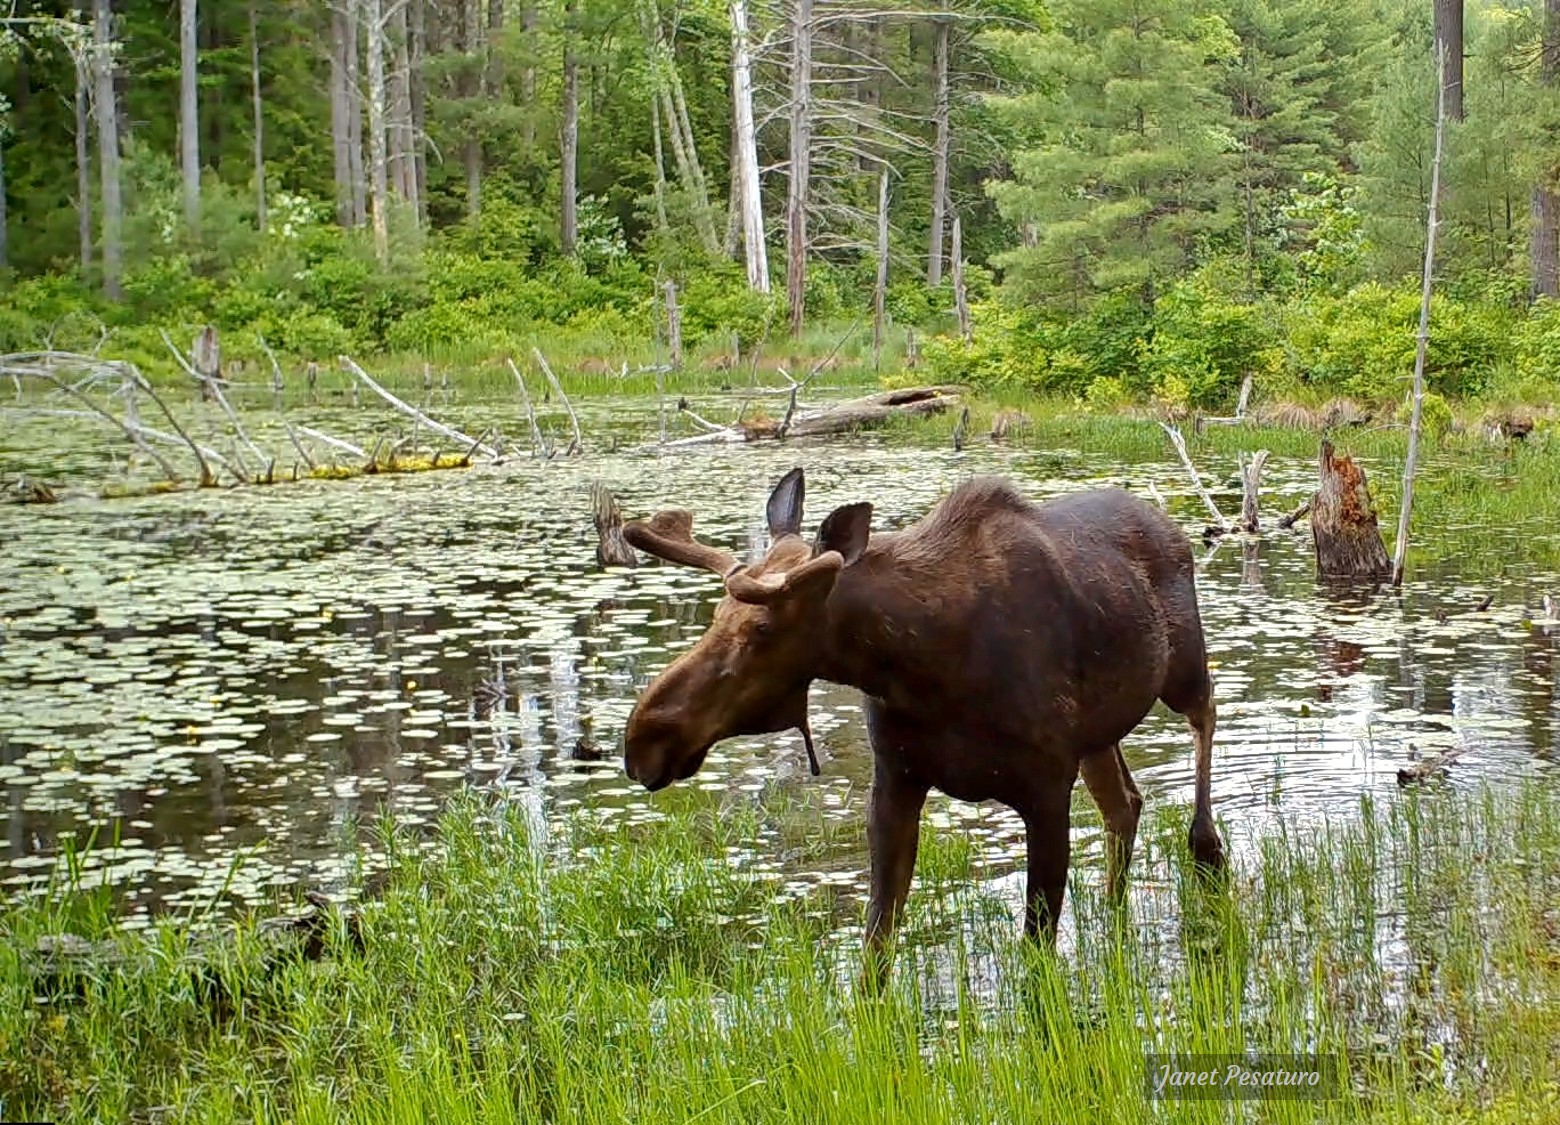 most moose are solitary like this one